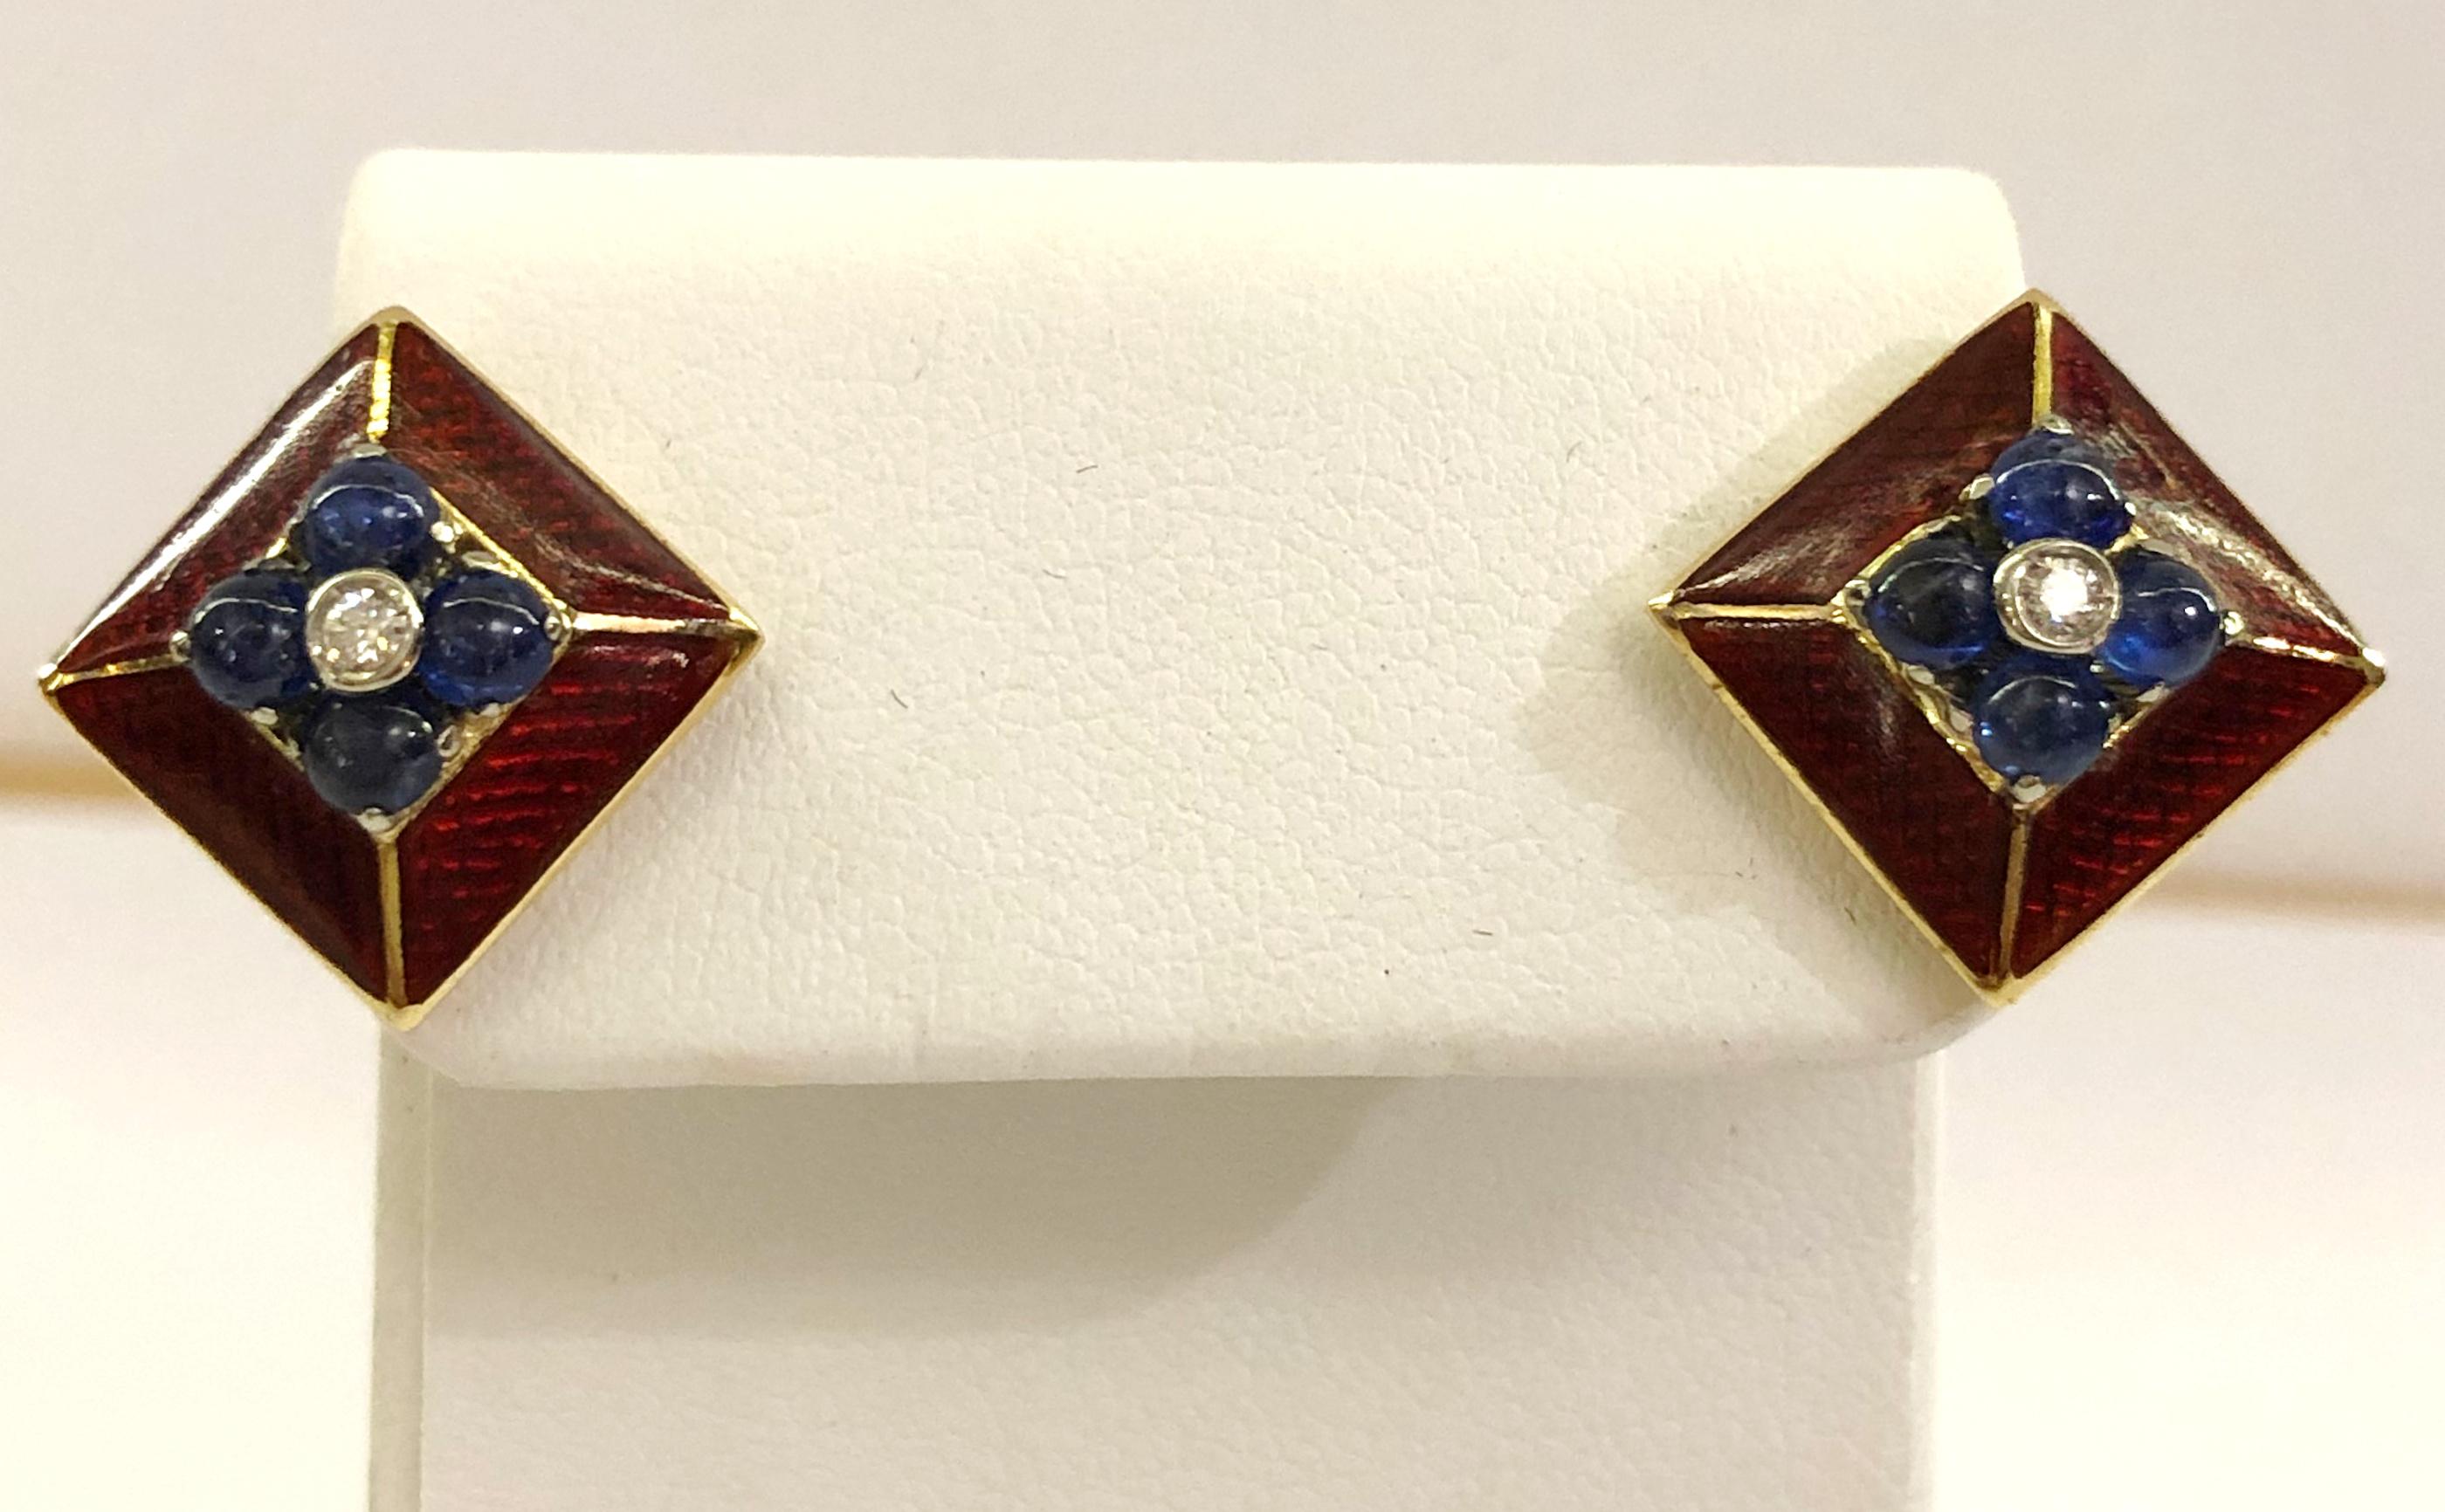 Pair of vintage earrings with 18 karat yellow gold, burgundy enamel, Cabochon sapphires, and brilliant central diamonds, Italy 1960s
Diameter 1.5cm